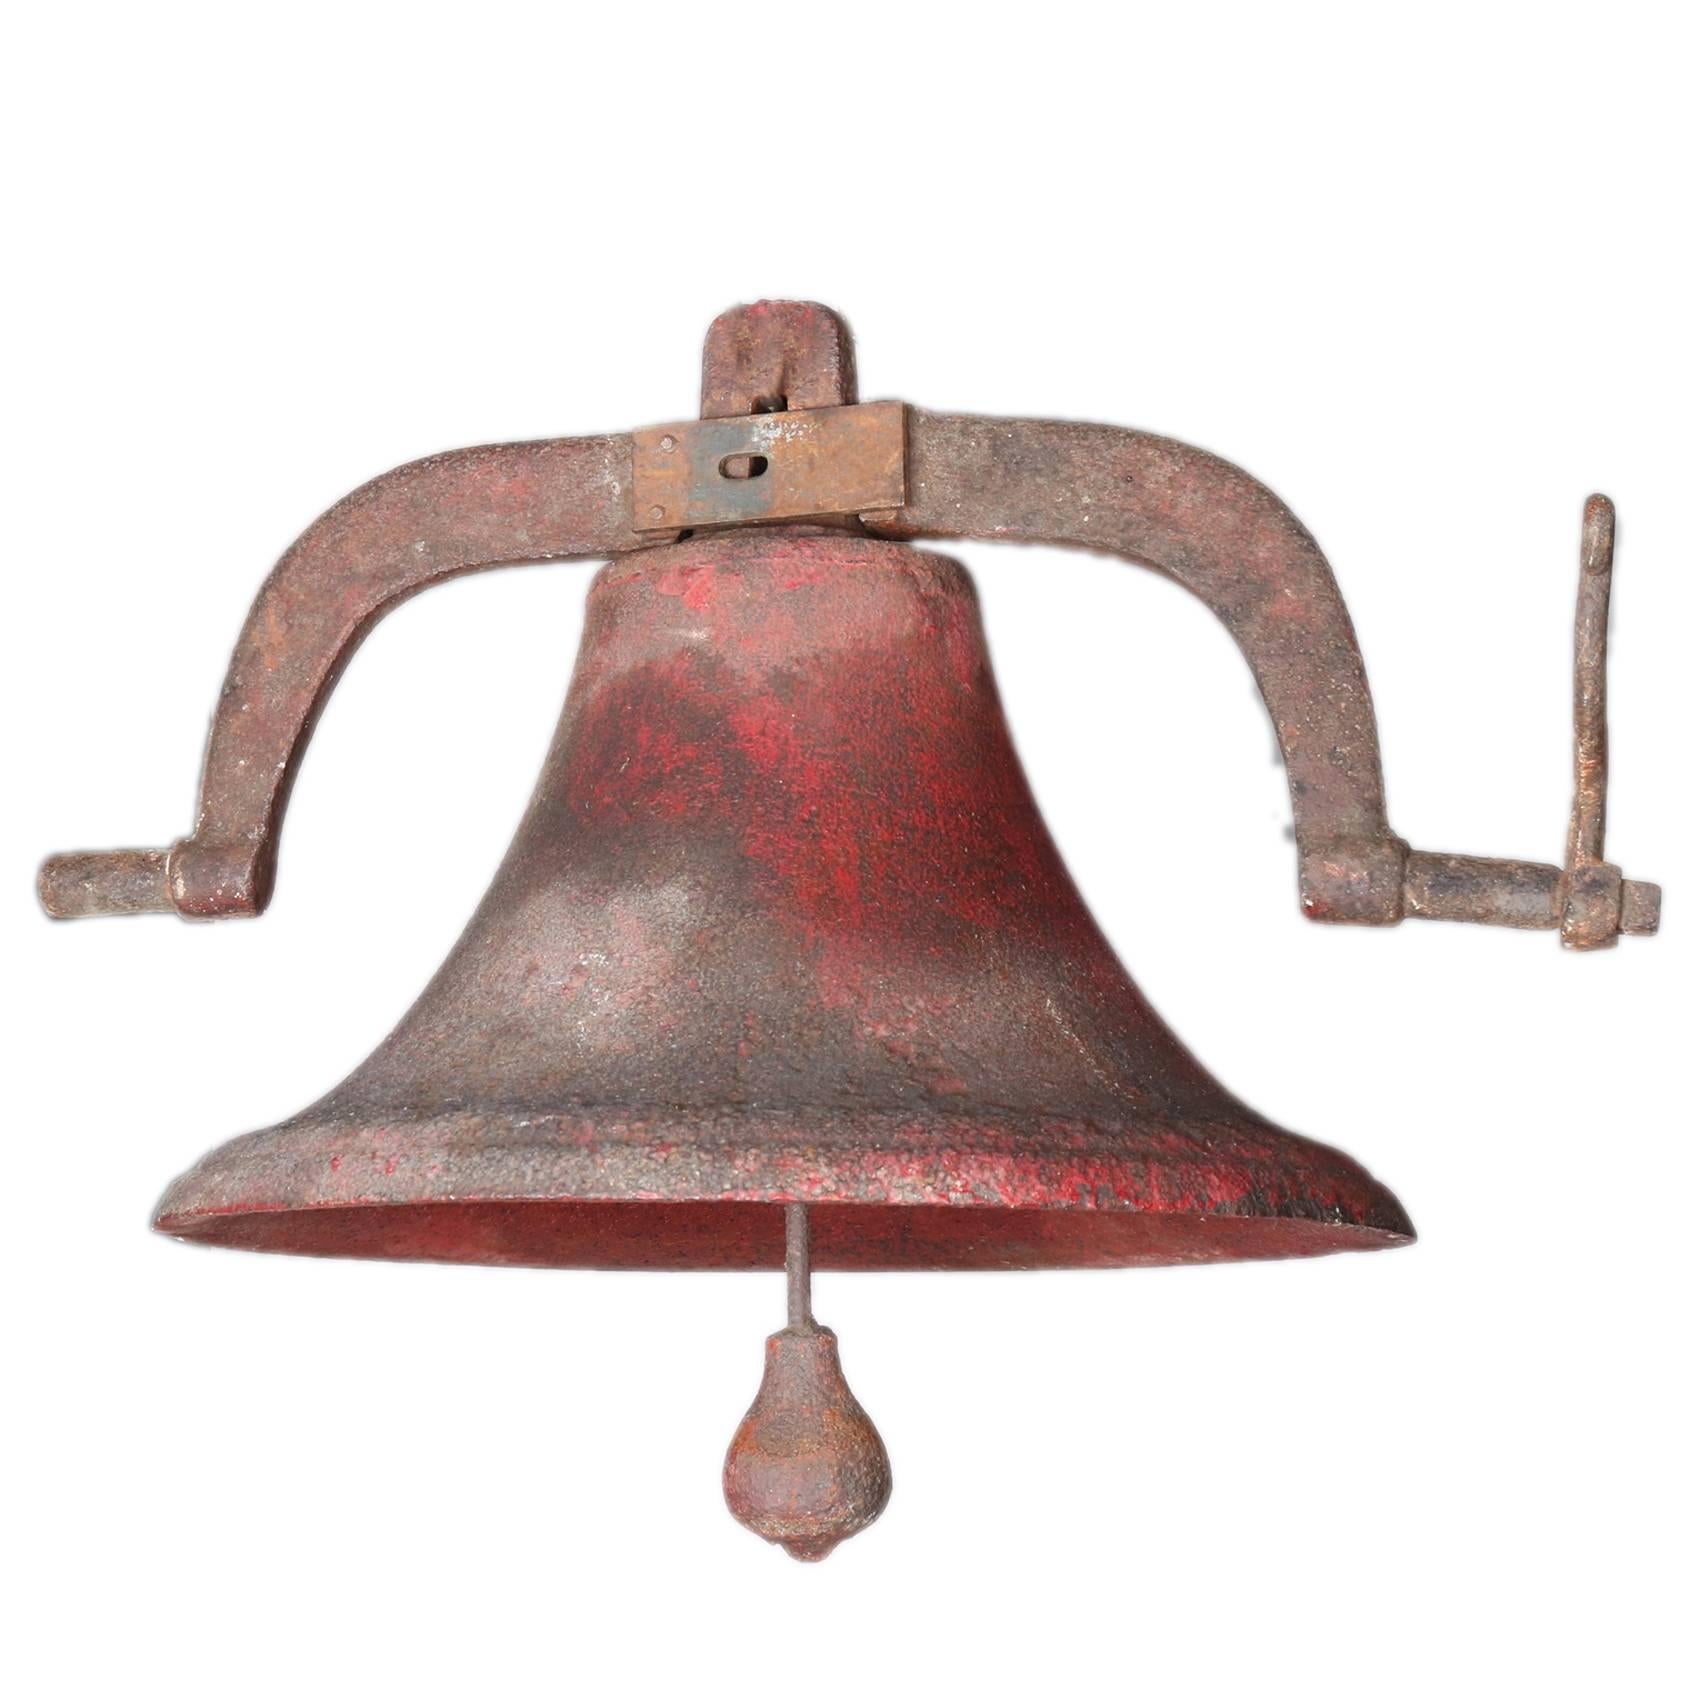 Early Antique Cast Iron School Bell by B.C. Taylor, Dayton, Ohio, 19th Century